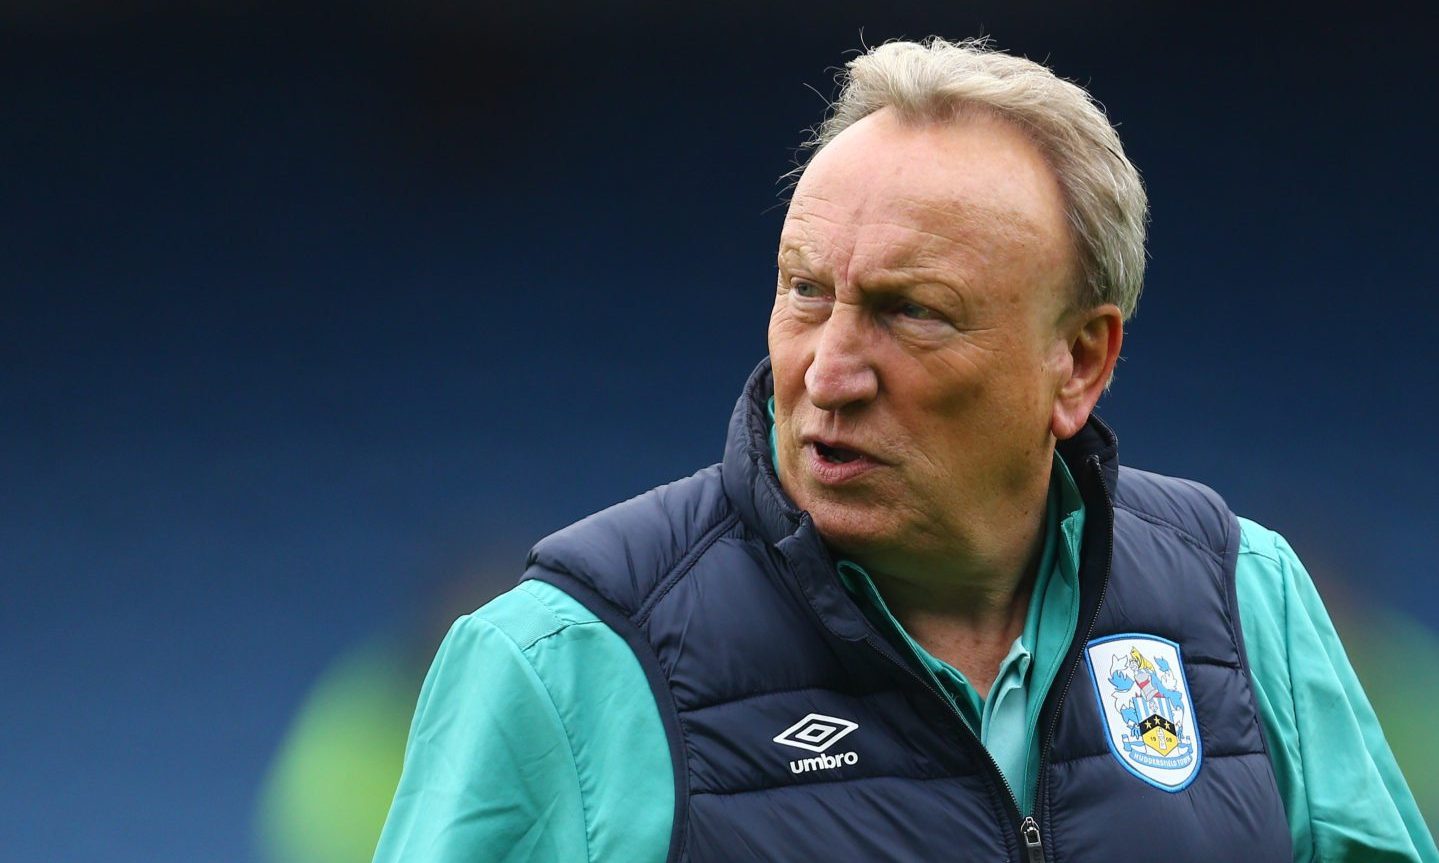 Neil Warnock during his most recent stint in charge of Huddersfield Town. Image: Shutterstock.